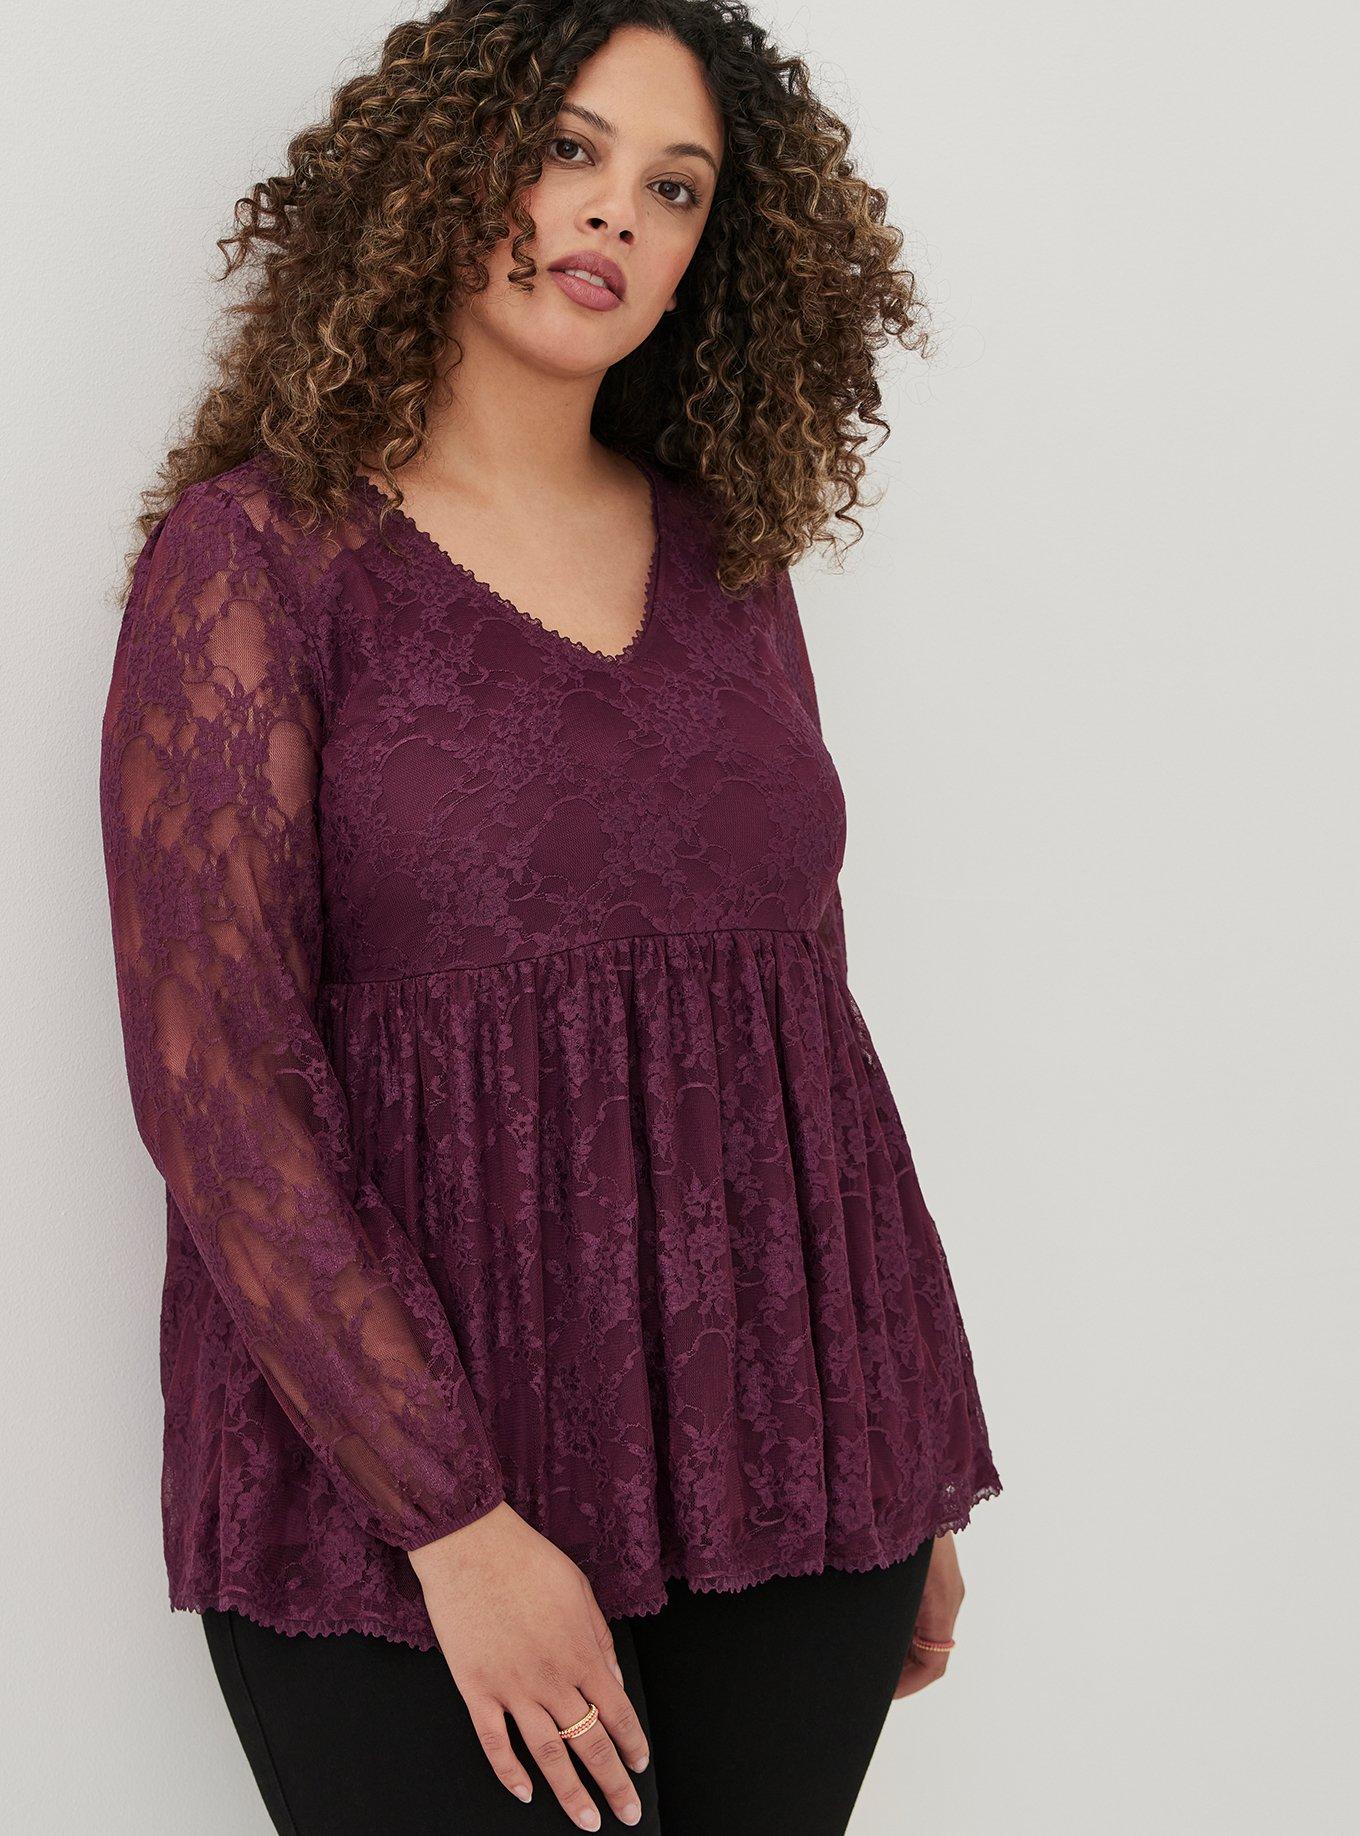 BNWT Torrid Plus Size 2 (18/20) Lavender Purple Lace Tiered Babydoll Tunic  Top